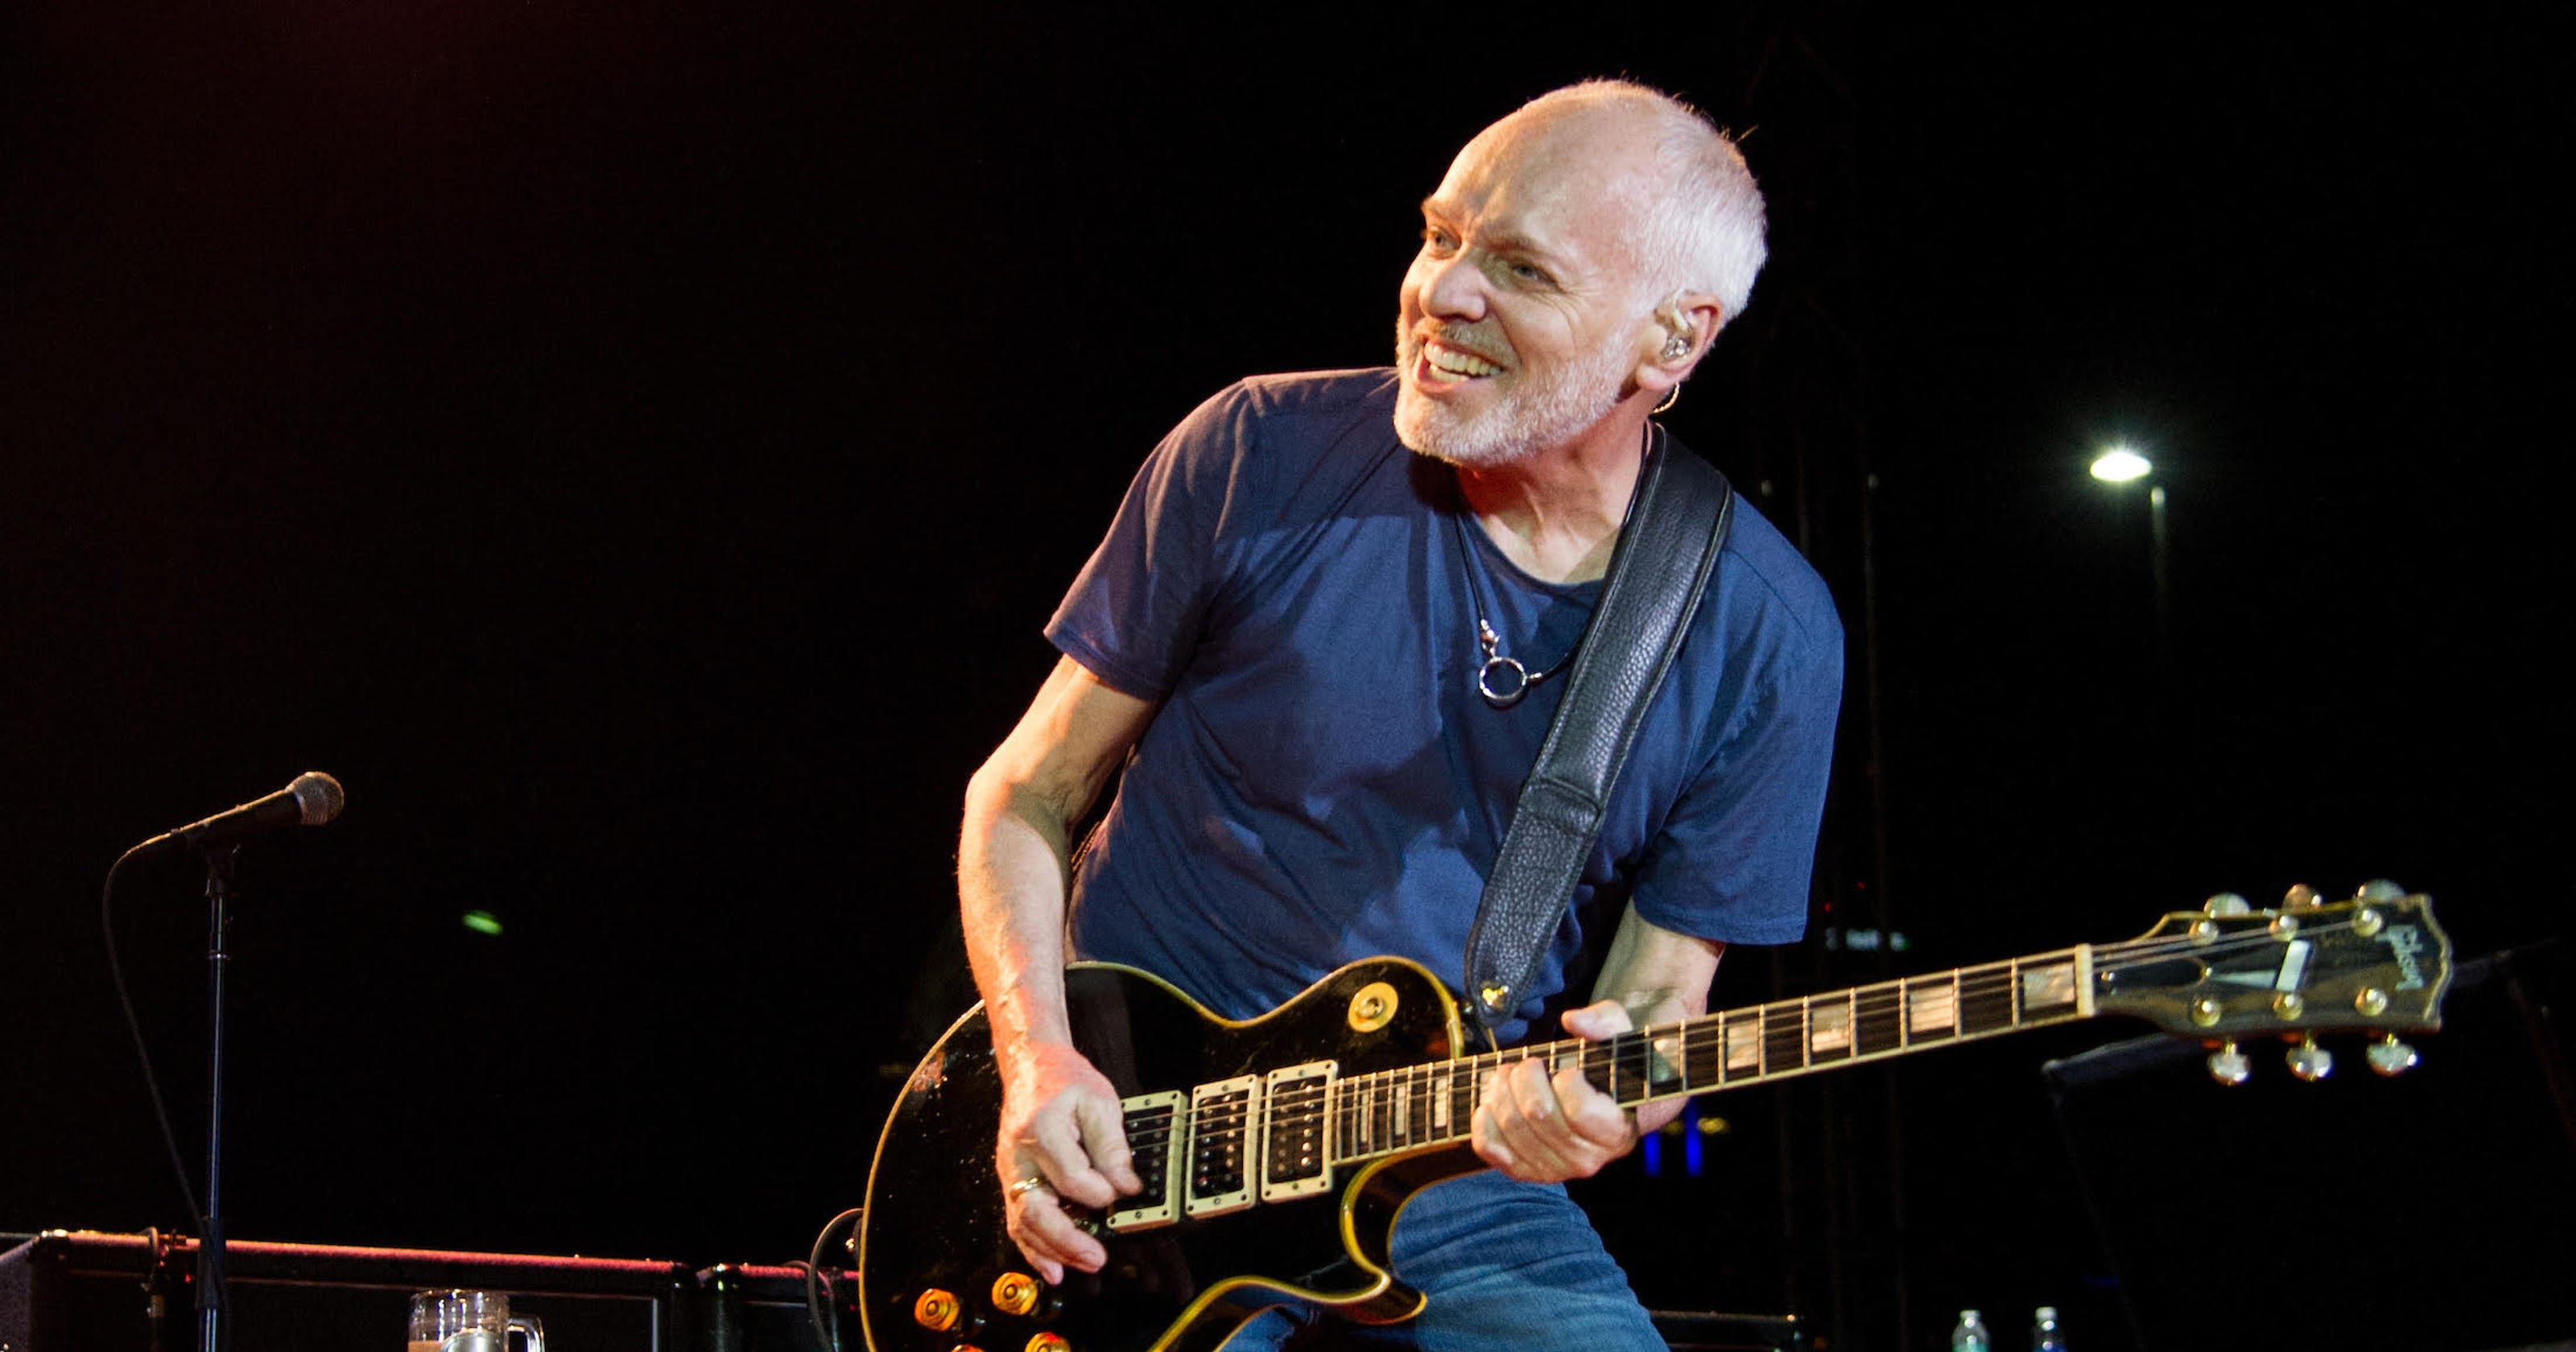 Peter Frampton opens up about health, new music